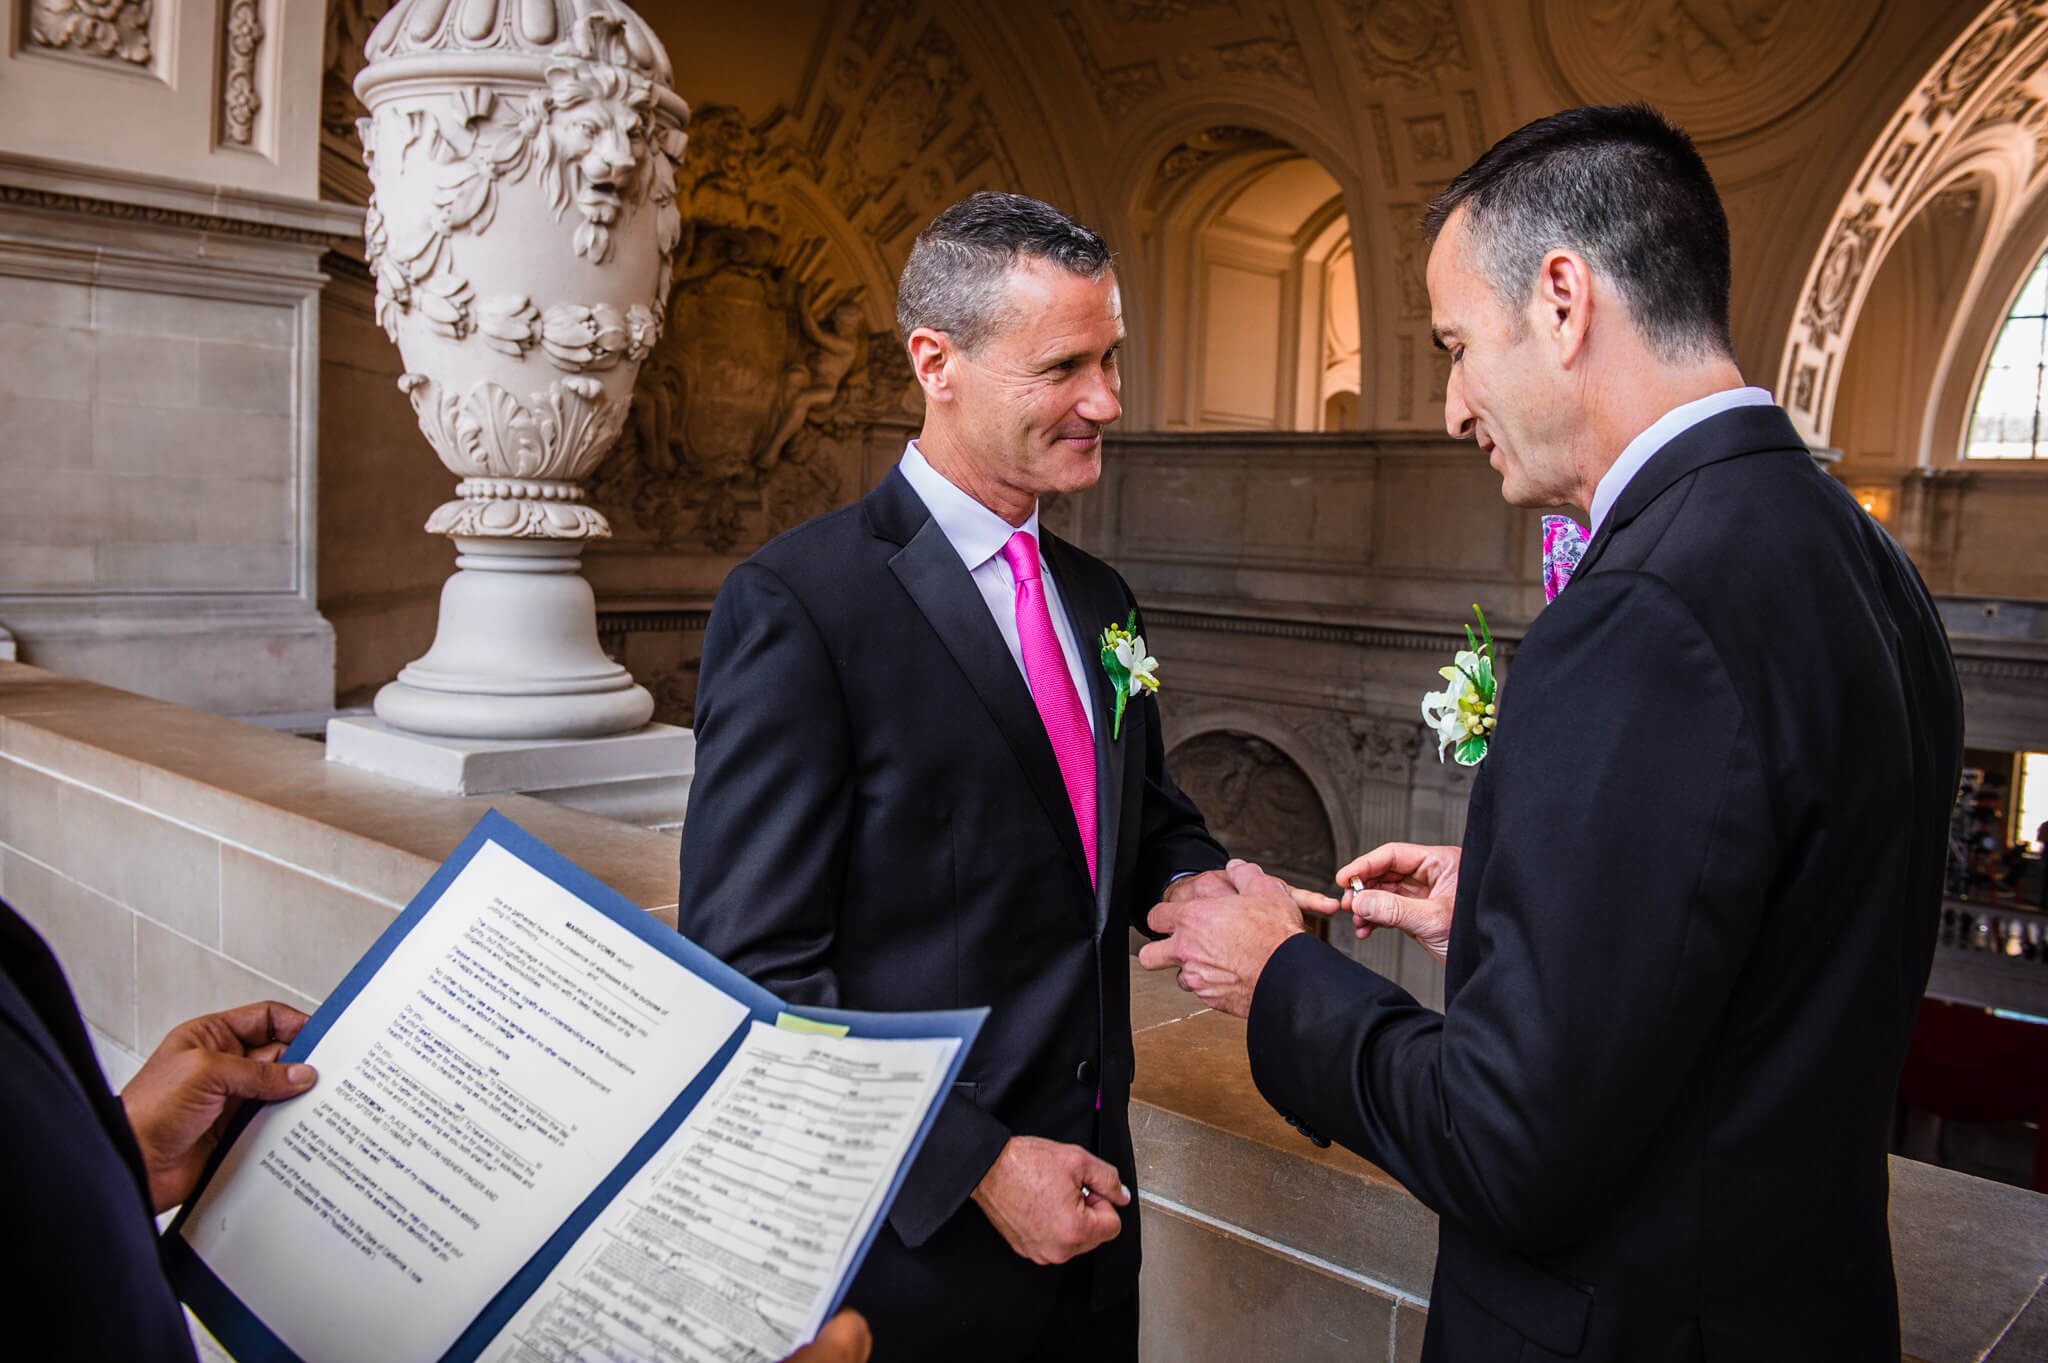 Two men exchange rings and vows at San Francisco City Hall same-sex marriage